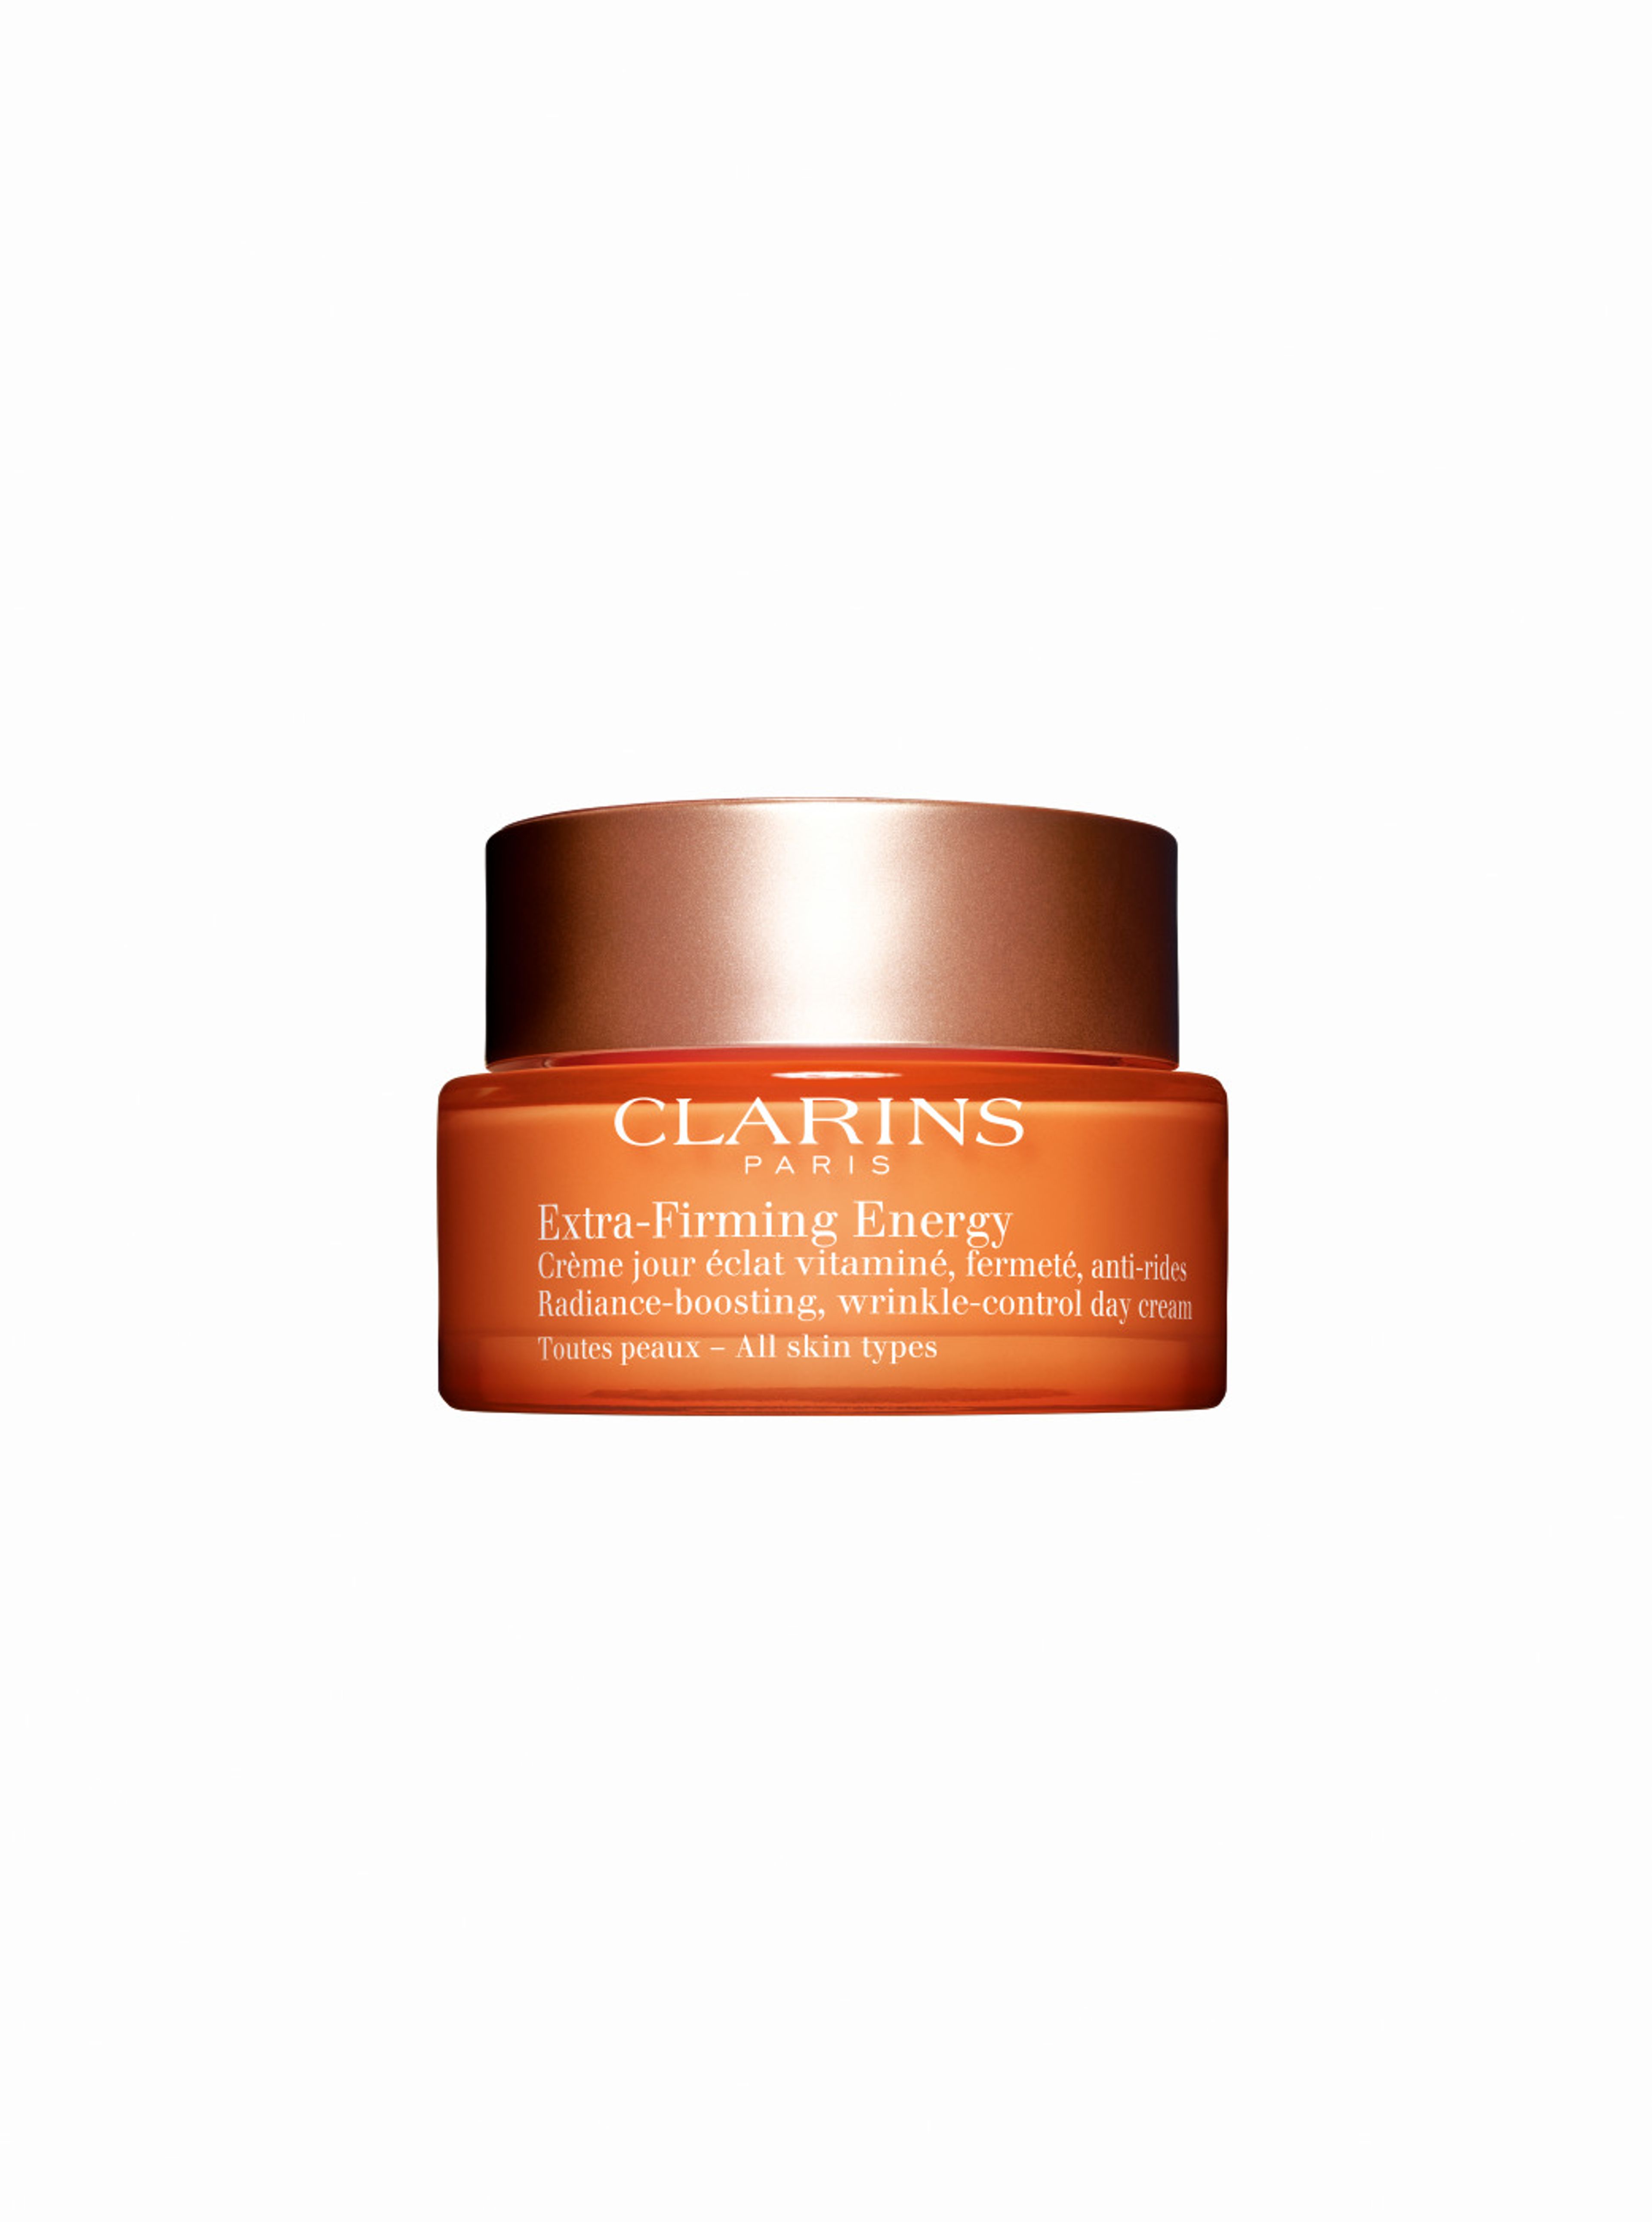 Clarins Extra-firming Energy 1